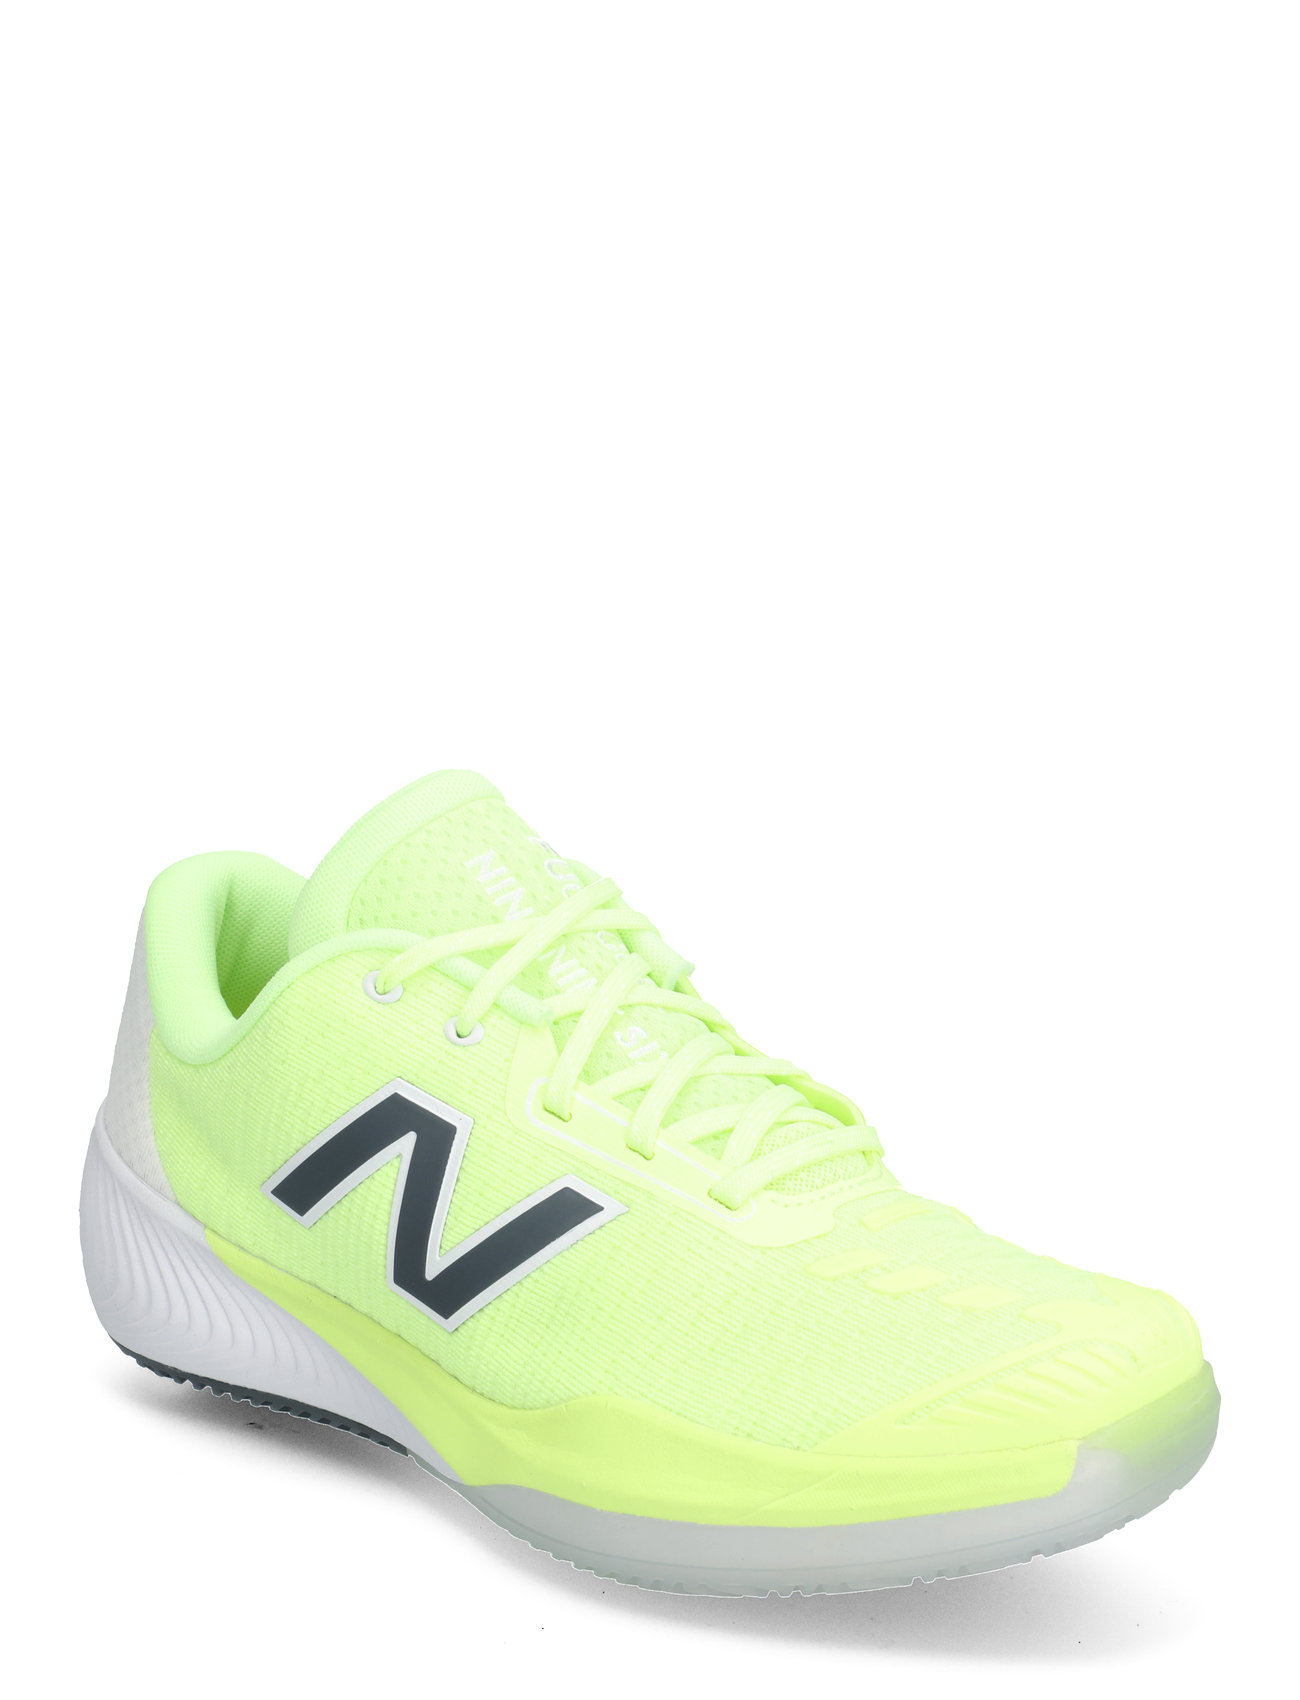 New Balance Clay Court Fuel Cell 996V5 Sport Sport Shoes Racketsports Shoes Tennis Shoes Green New Balance